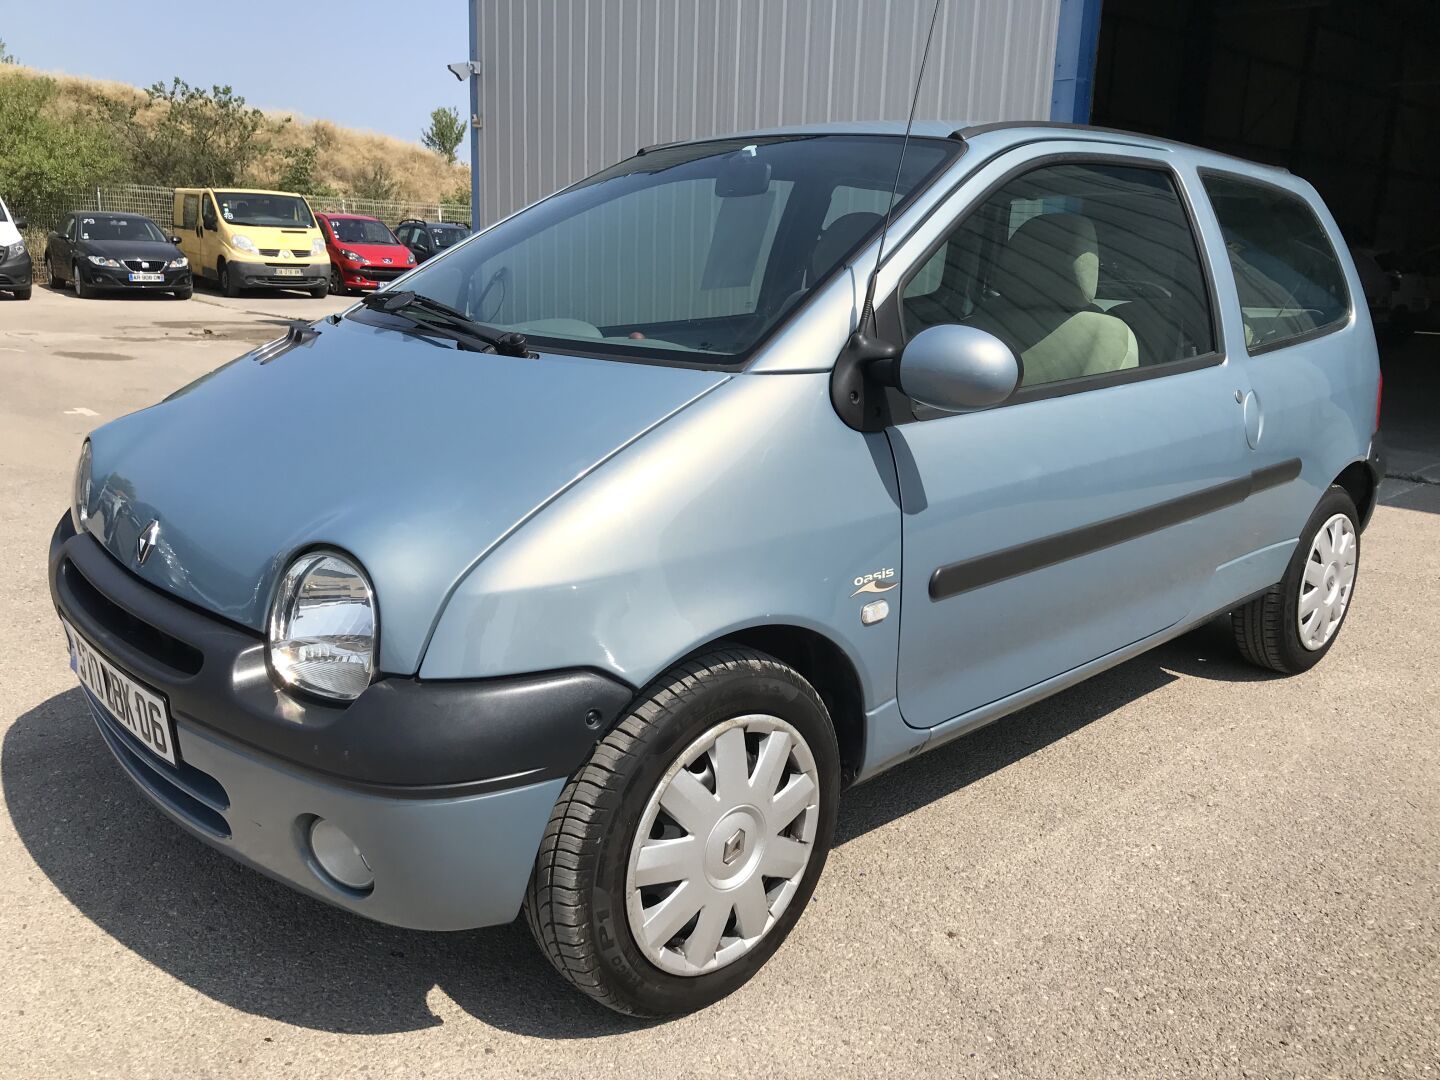 Null TWINGO 1.2i 16V 75ch OASIS
VP RENAULT TWINGO 1.2i 16V 75ch OASIS EXPR 16S
C&hellip;